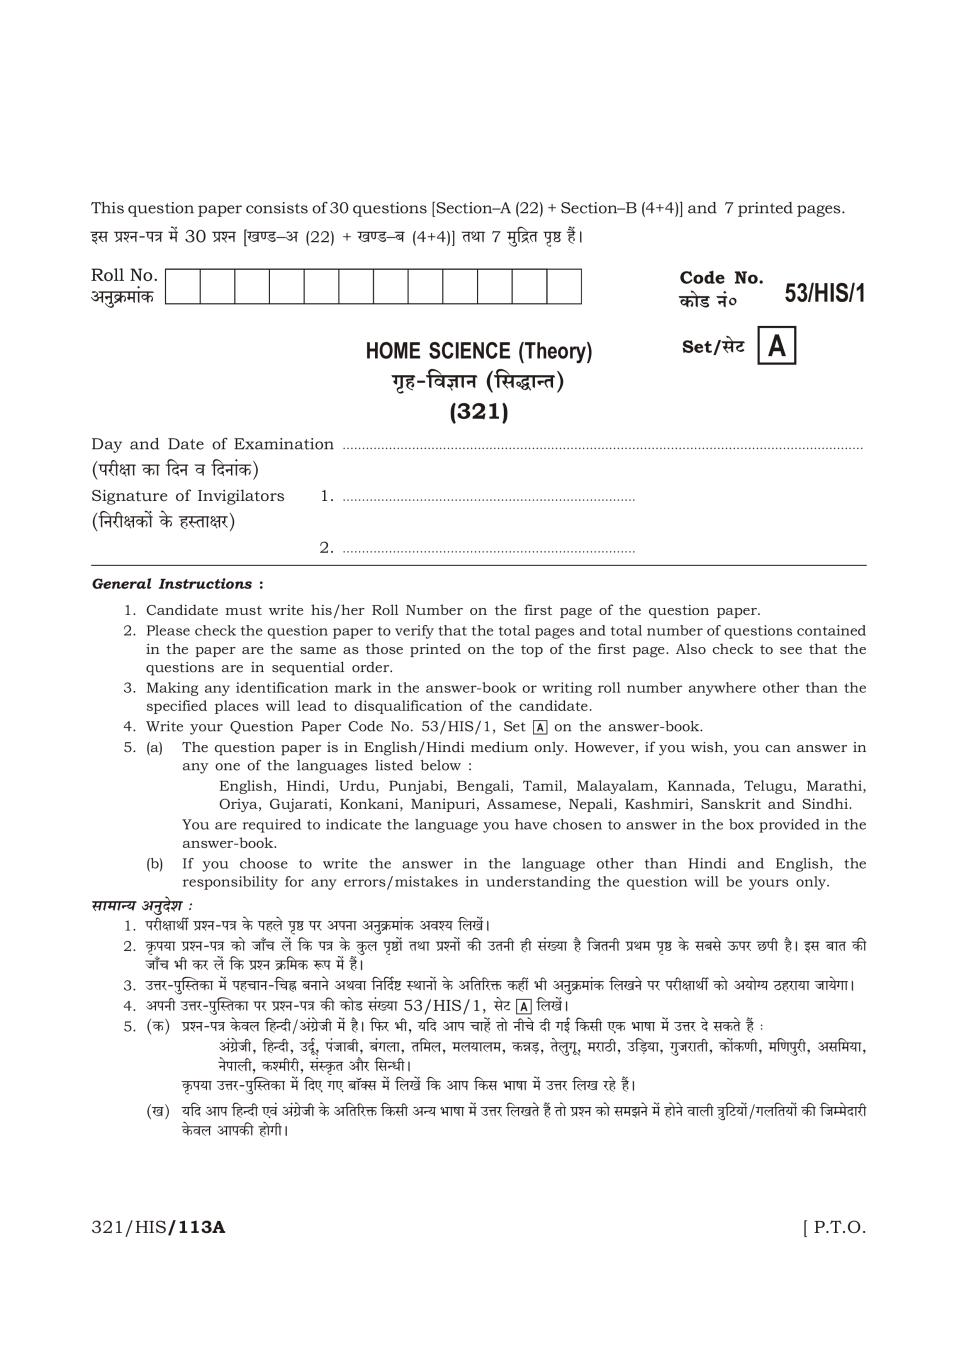 NIOS Class 12 Question Paper Oct 2016 - Home Science - Page 1